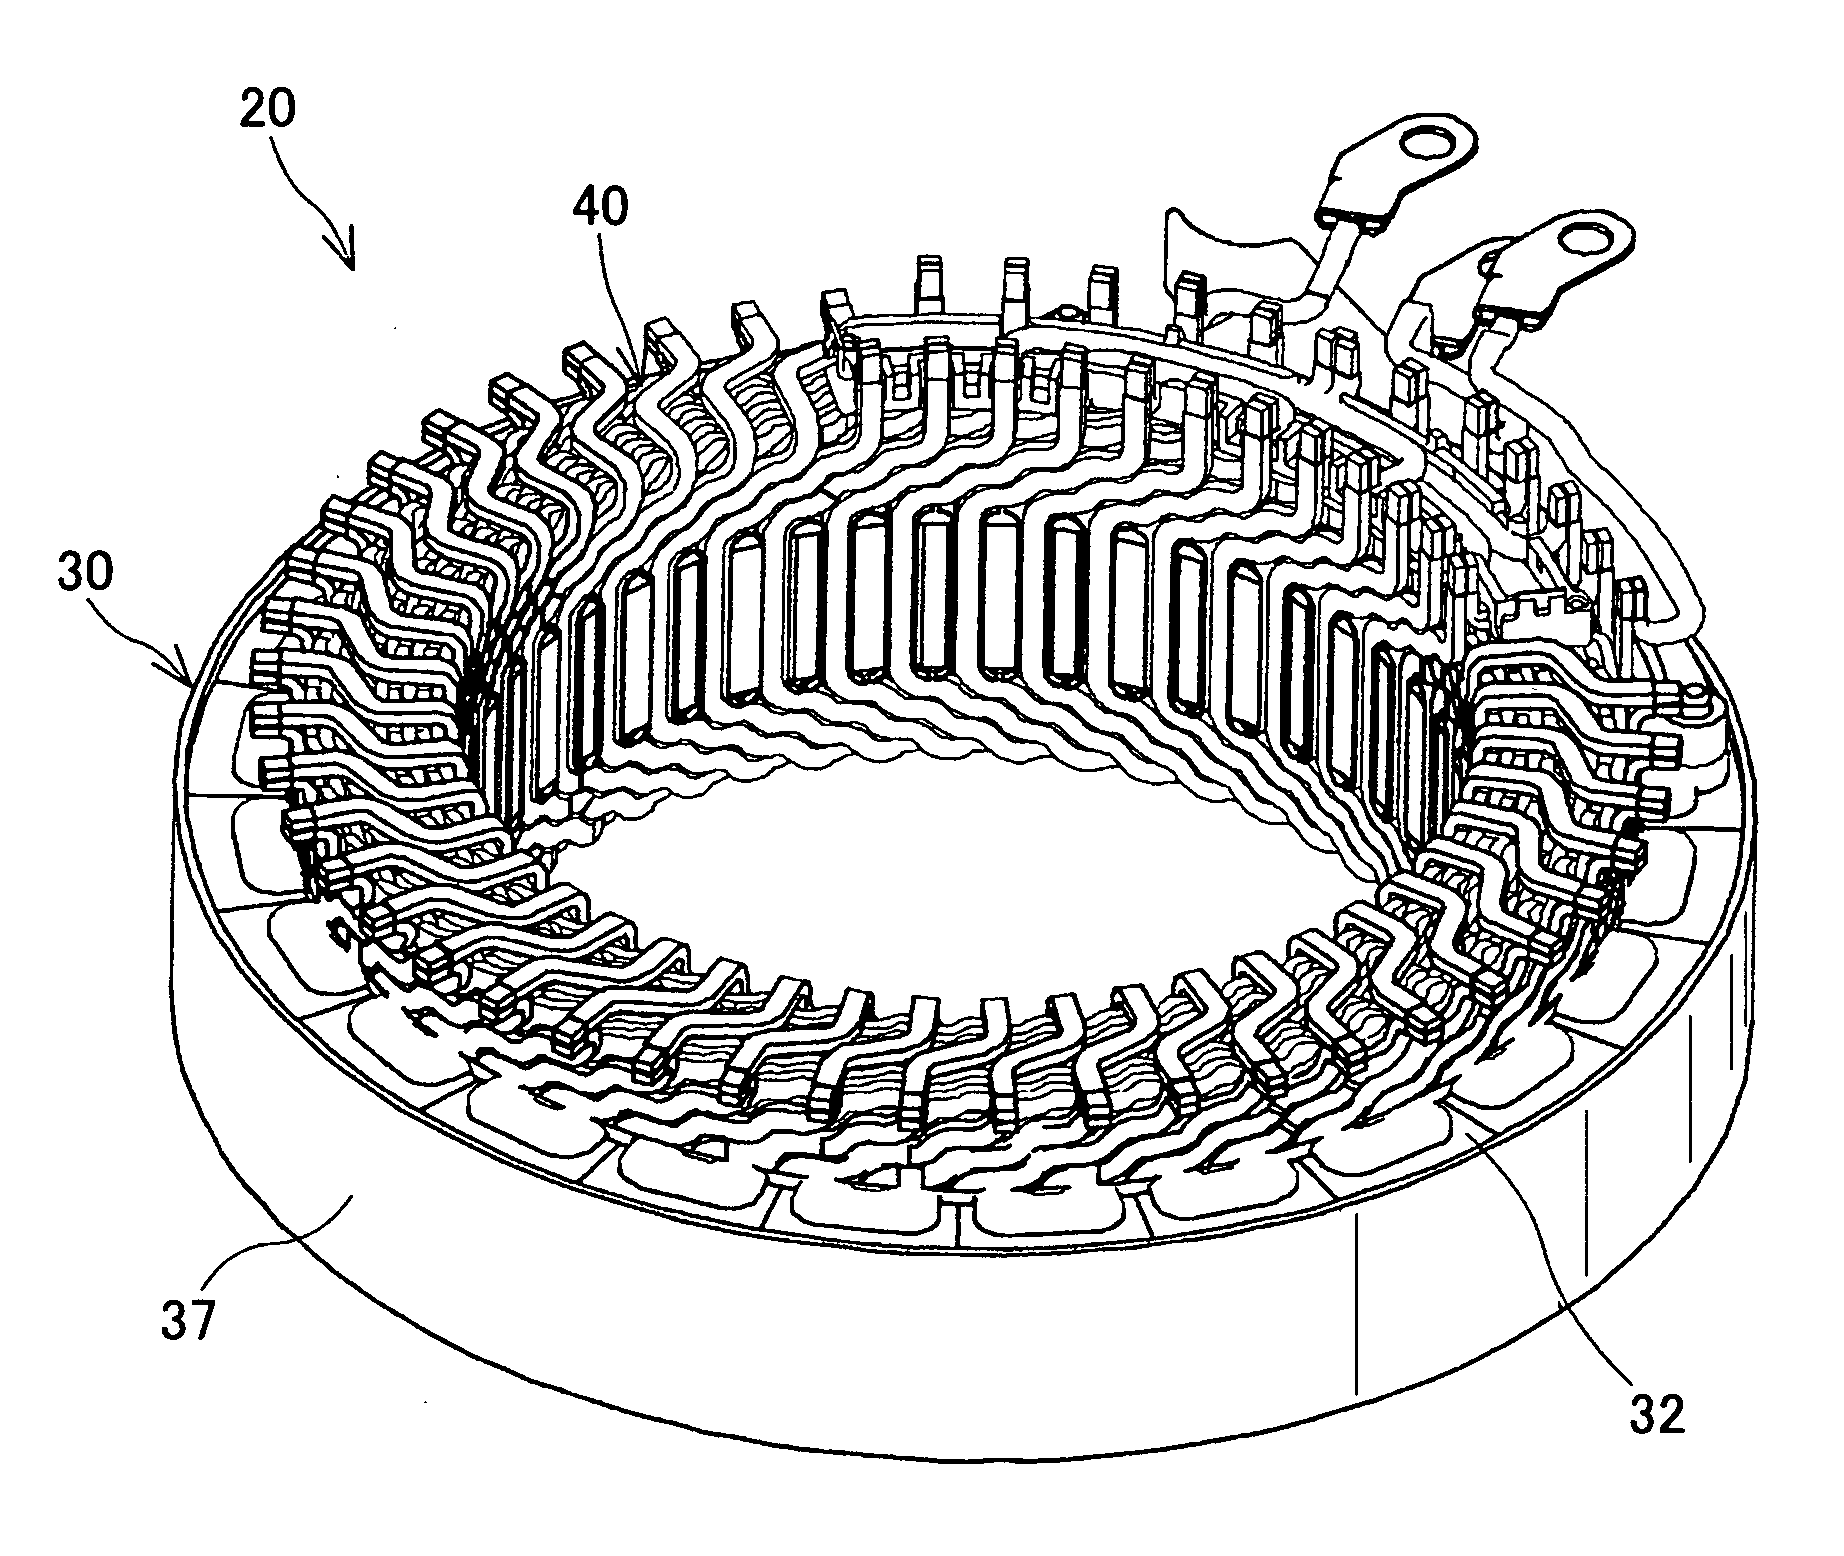 Stator for electric rotating machine and method of manufacturing the same